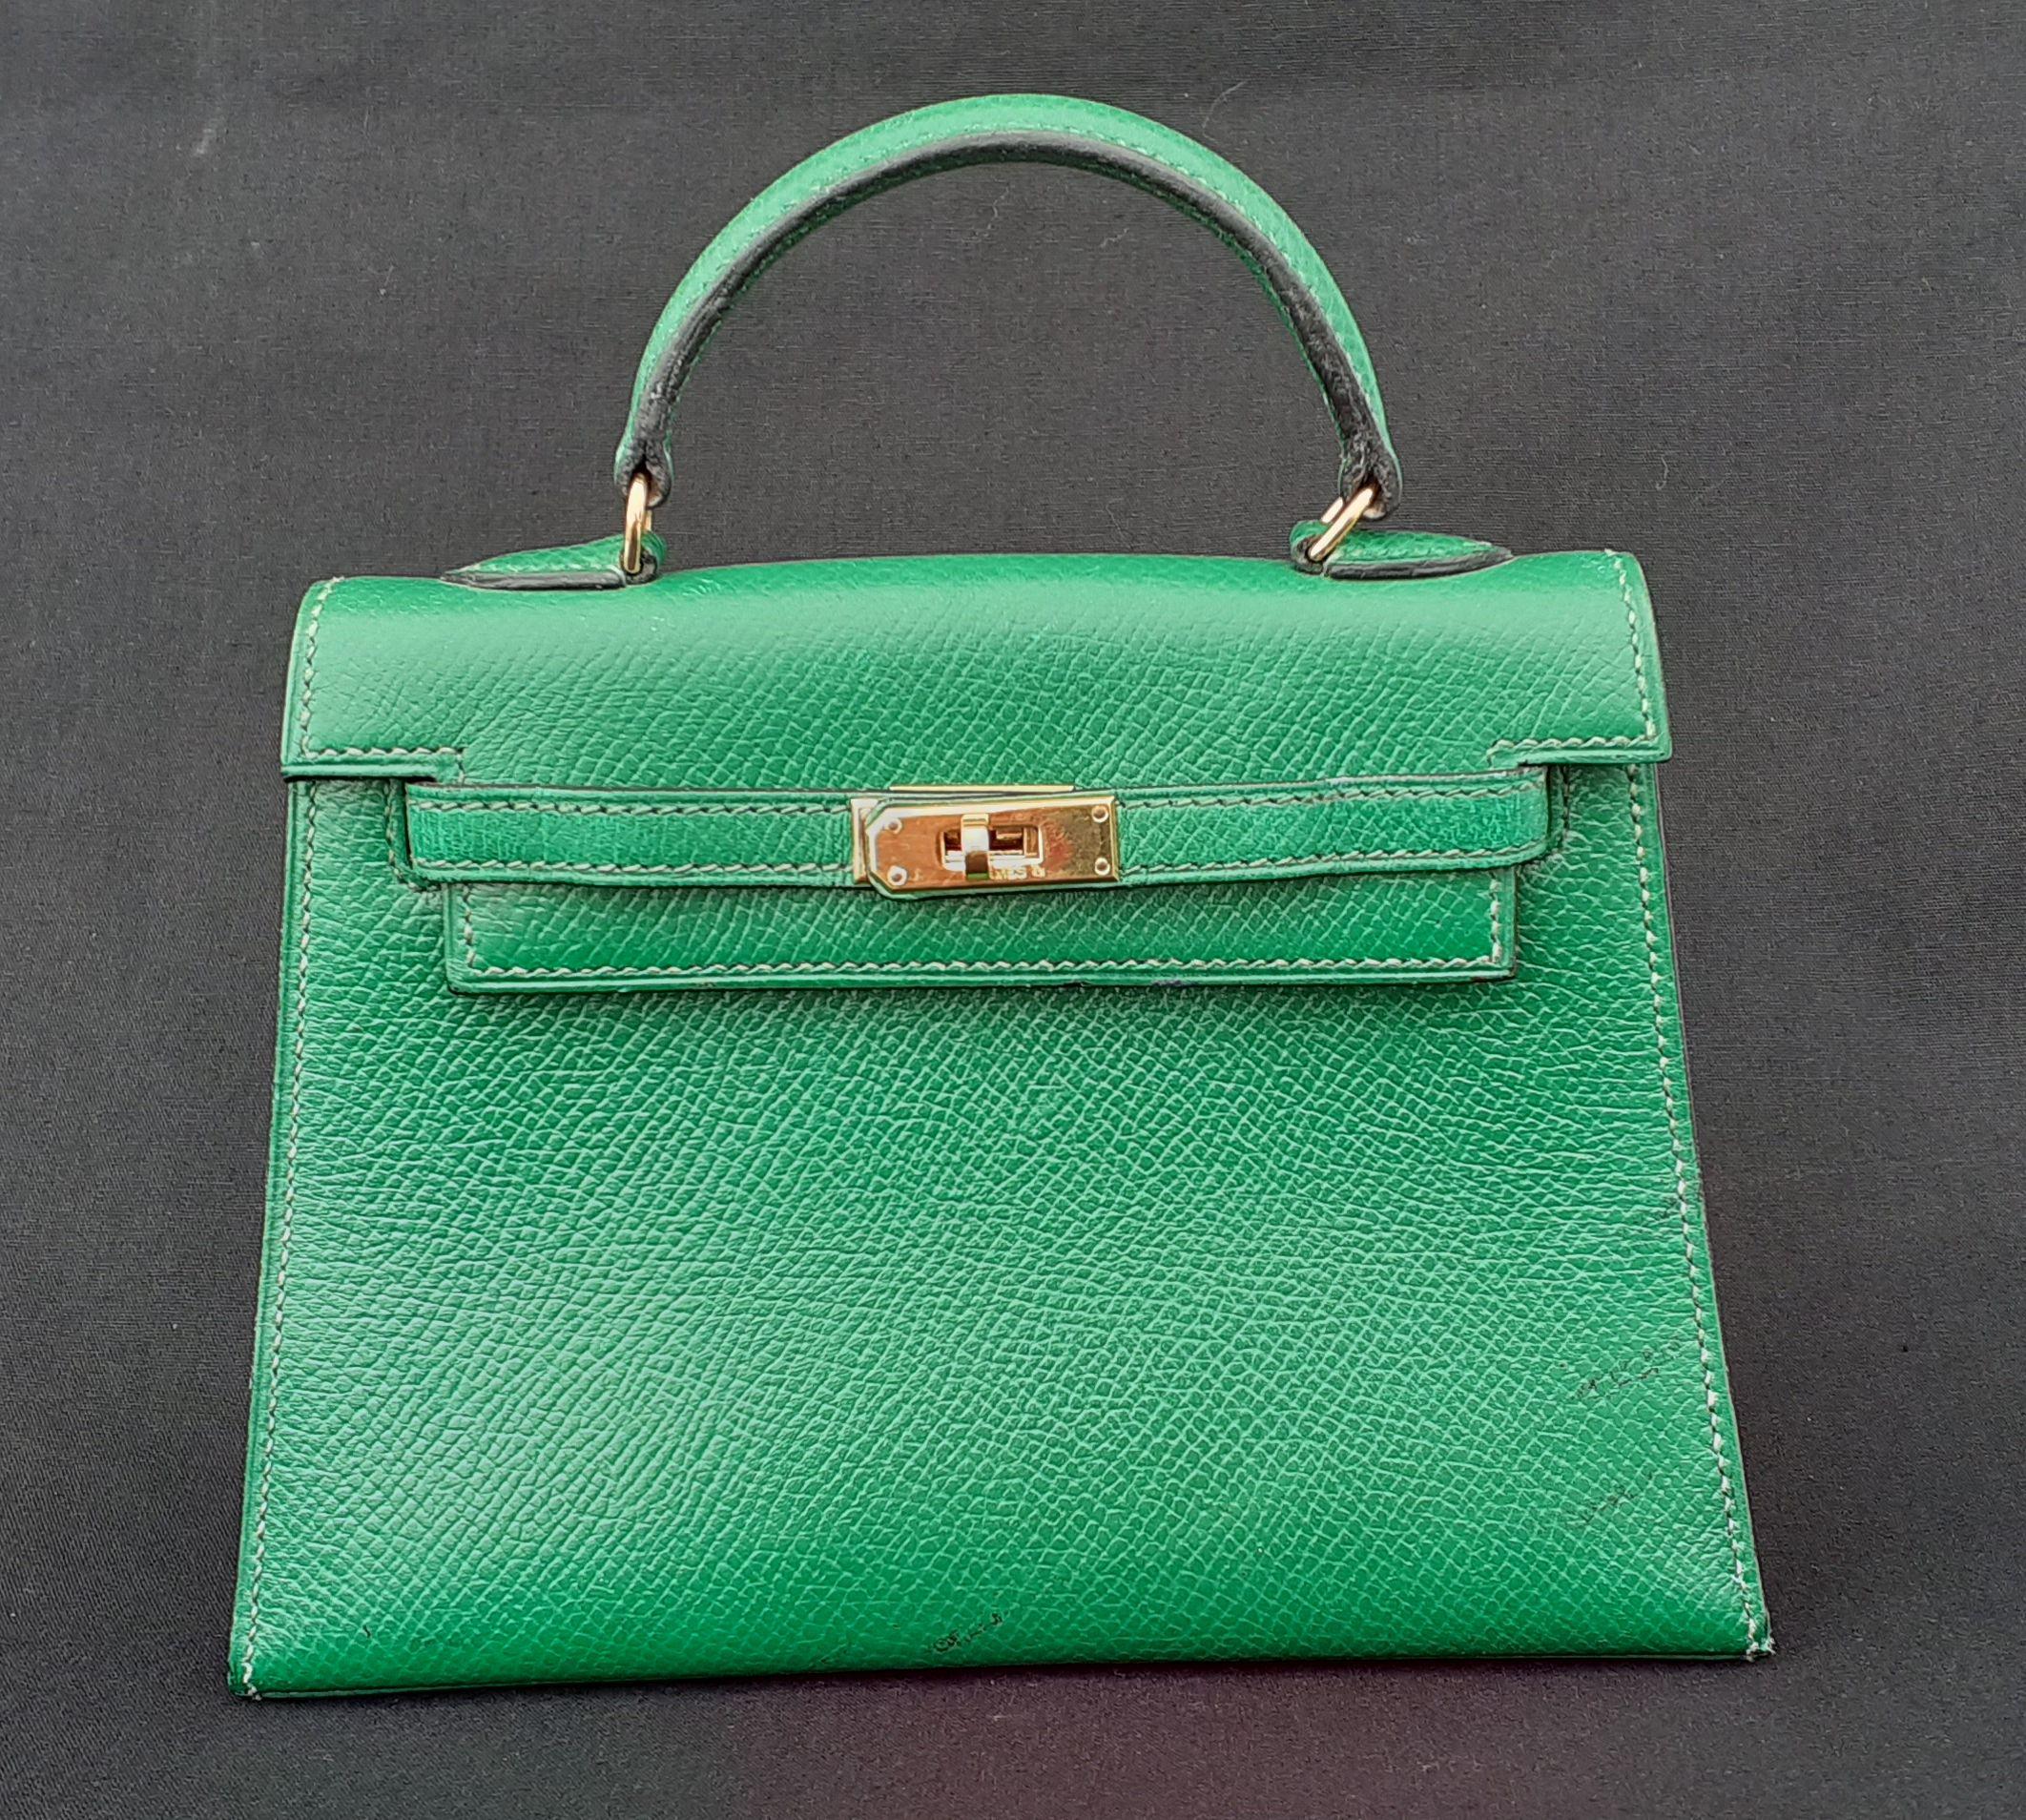 Blue Exceptional Hermès Vintage Micro Kelly 15 cm Sellier Bag Green Leather Gold Hdw